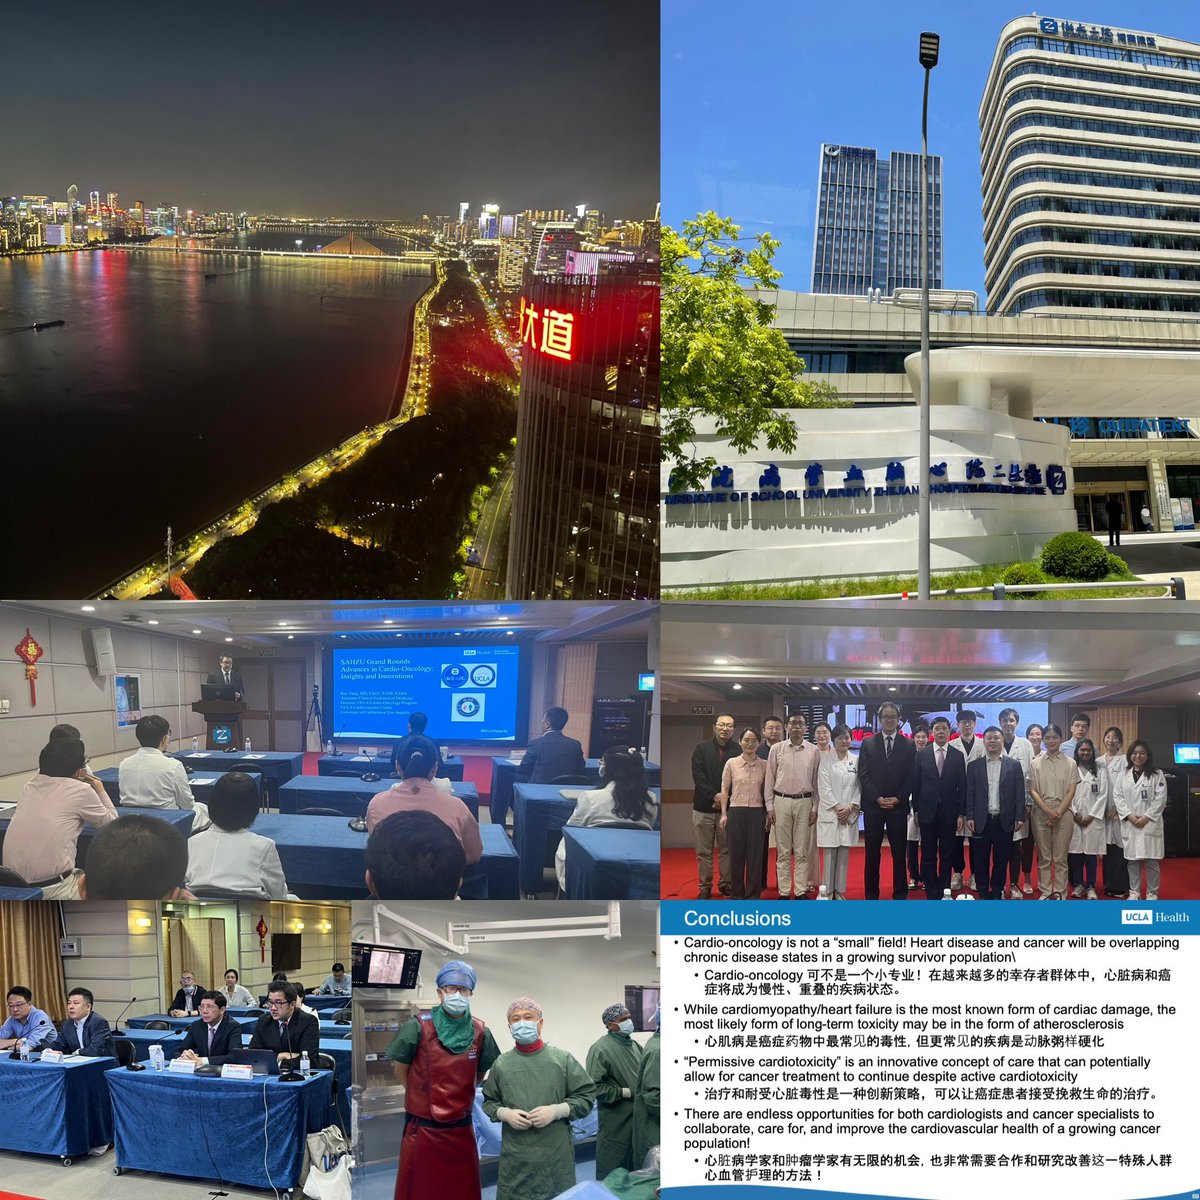 Witnessing the ☄️ growth of @dgsomucla sister 🏥@ZJU_China #SAHZU & #Hangzhou is just 🤯 🙏 Dr Jian’an Wang (#JACCAsia EIC) & your 🌎 class team for being 🤩 hosts & inviting me to discuss the ⬆️ of #cardioonc Excited about reviving our #bruinhearts @uclaCVfellows exchange!